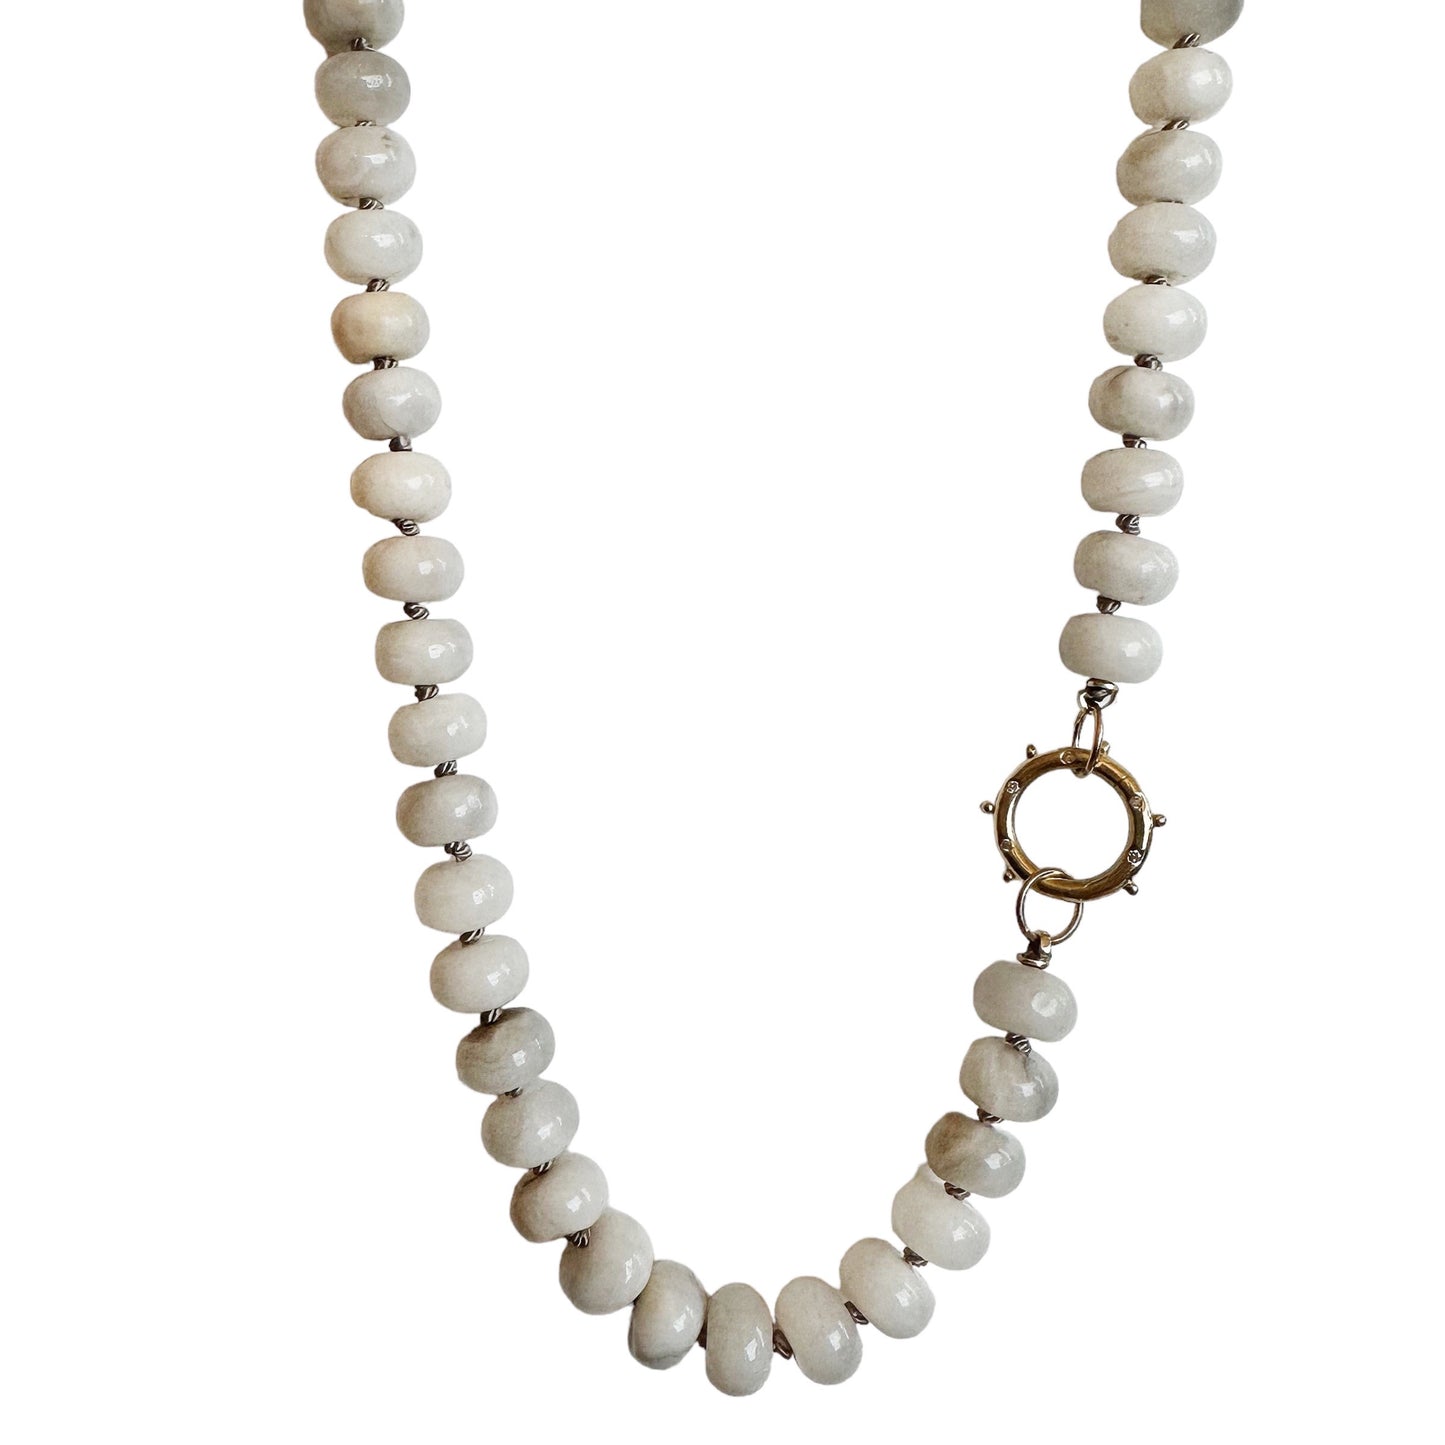 Pale Gray Agate Gemstone Necklace